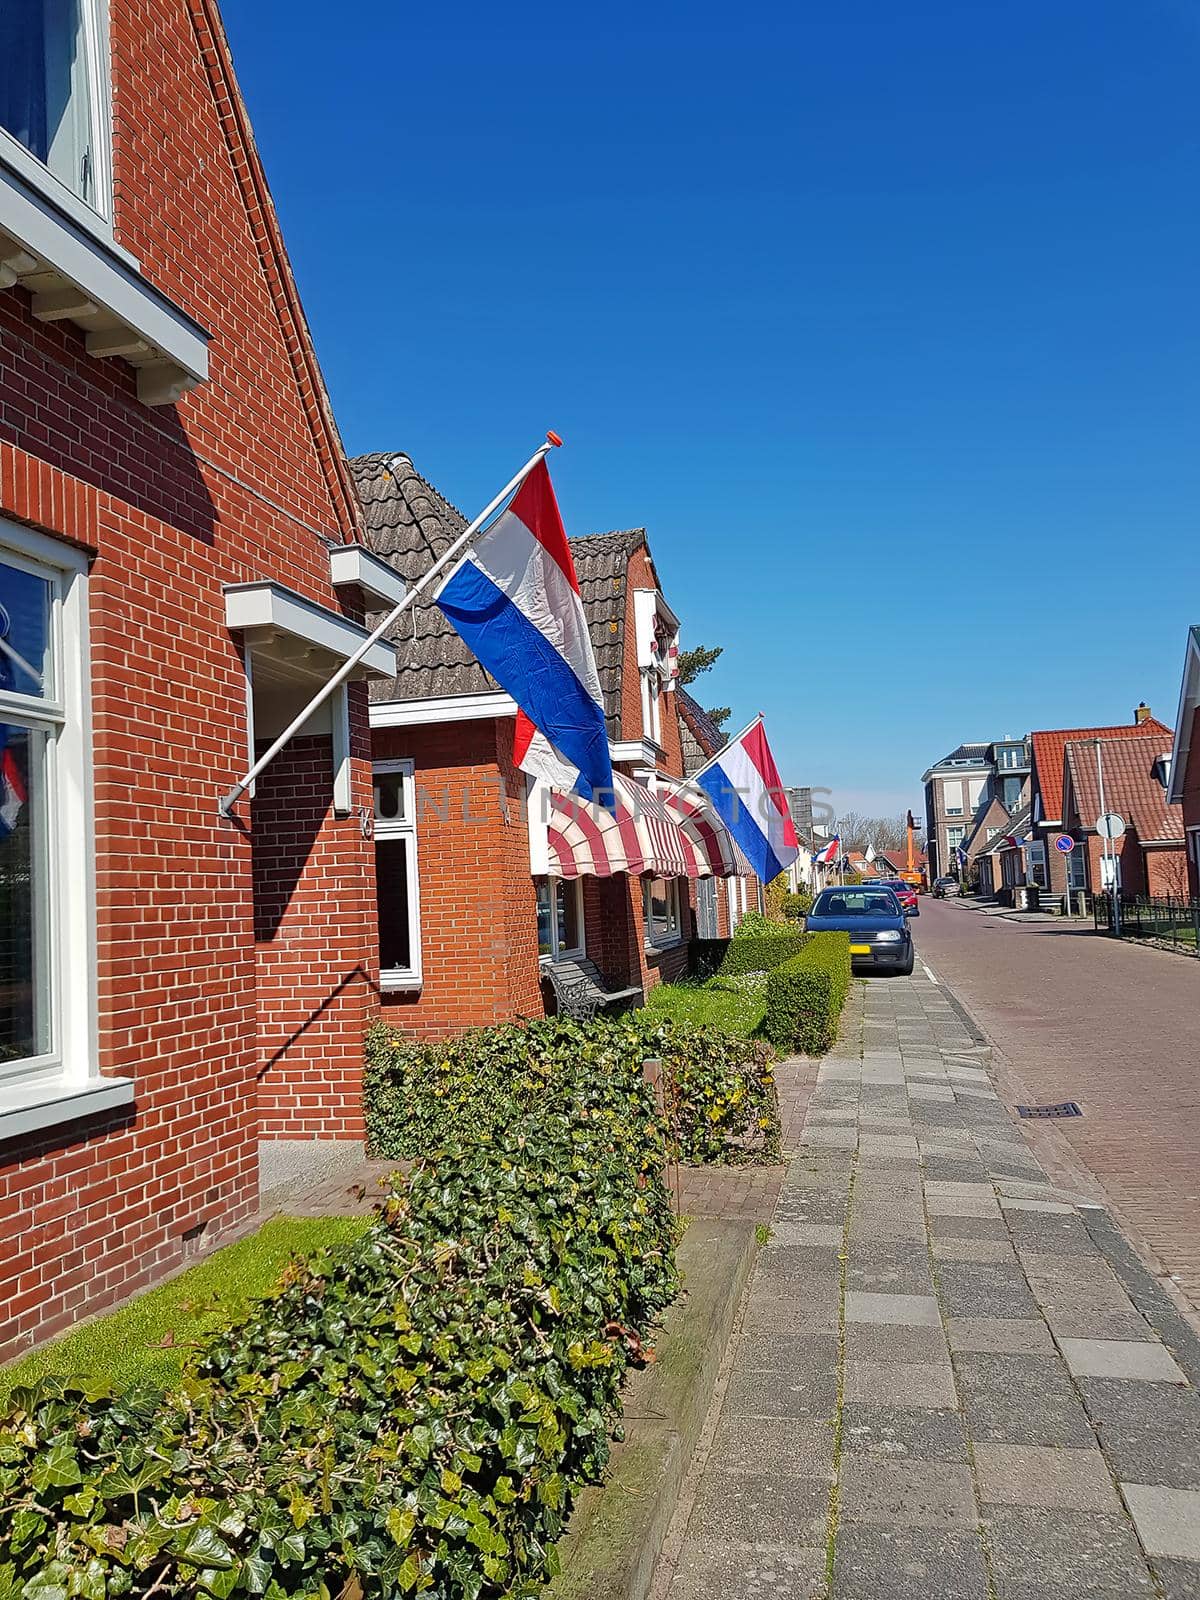 Kingsday in a little village in the Netherlands by devy